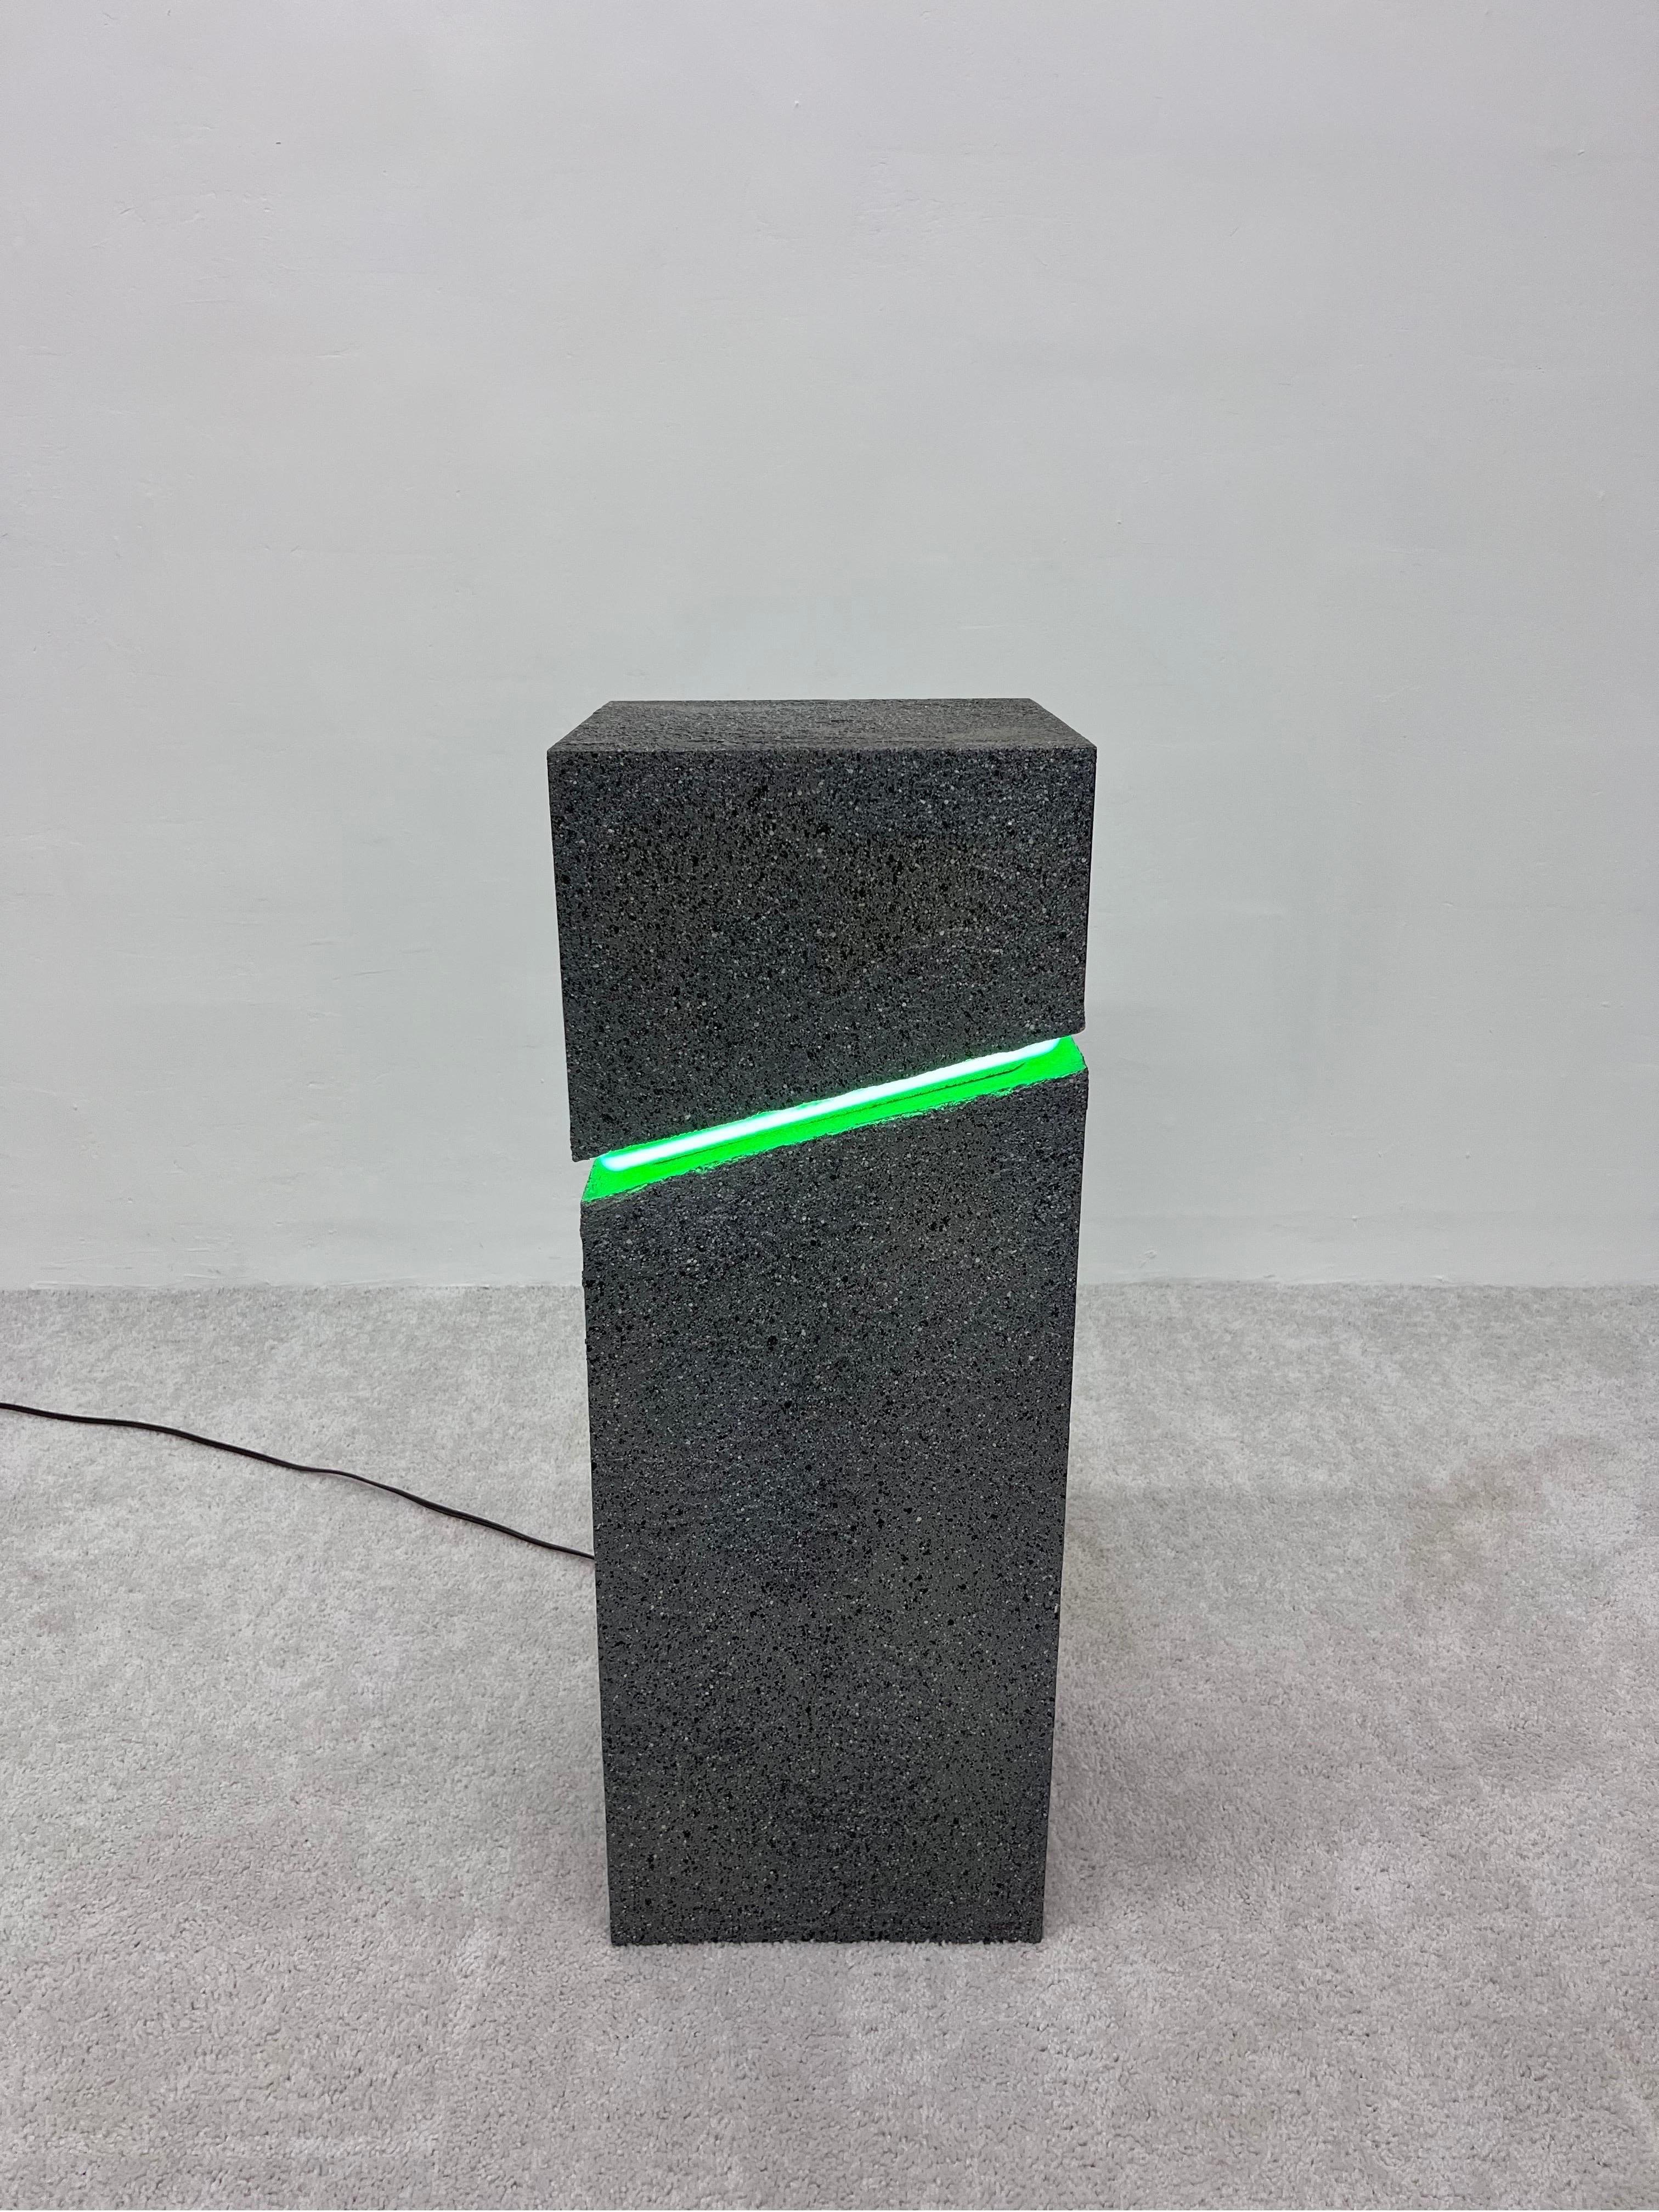 Postmodern 1980s black and white splatter painted textural pedestal with green neon lamp.